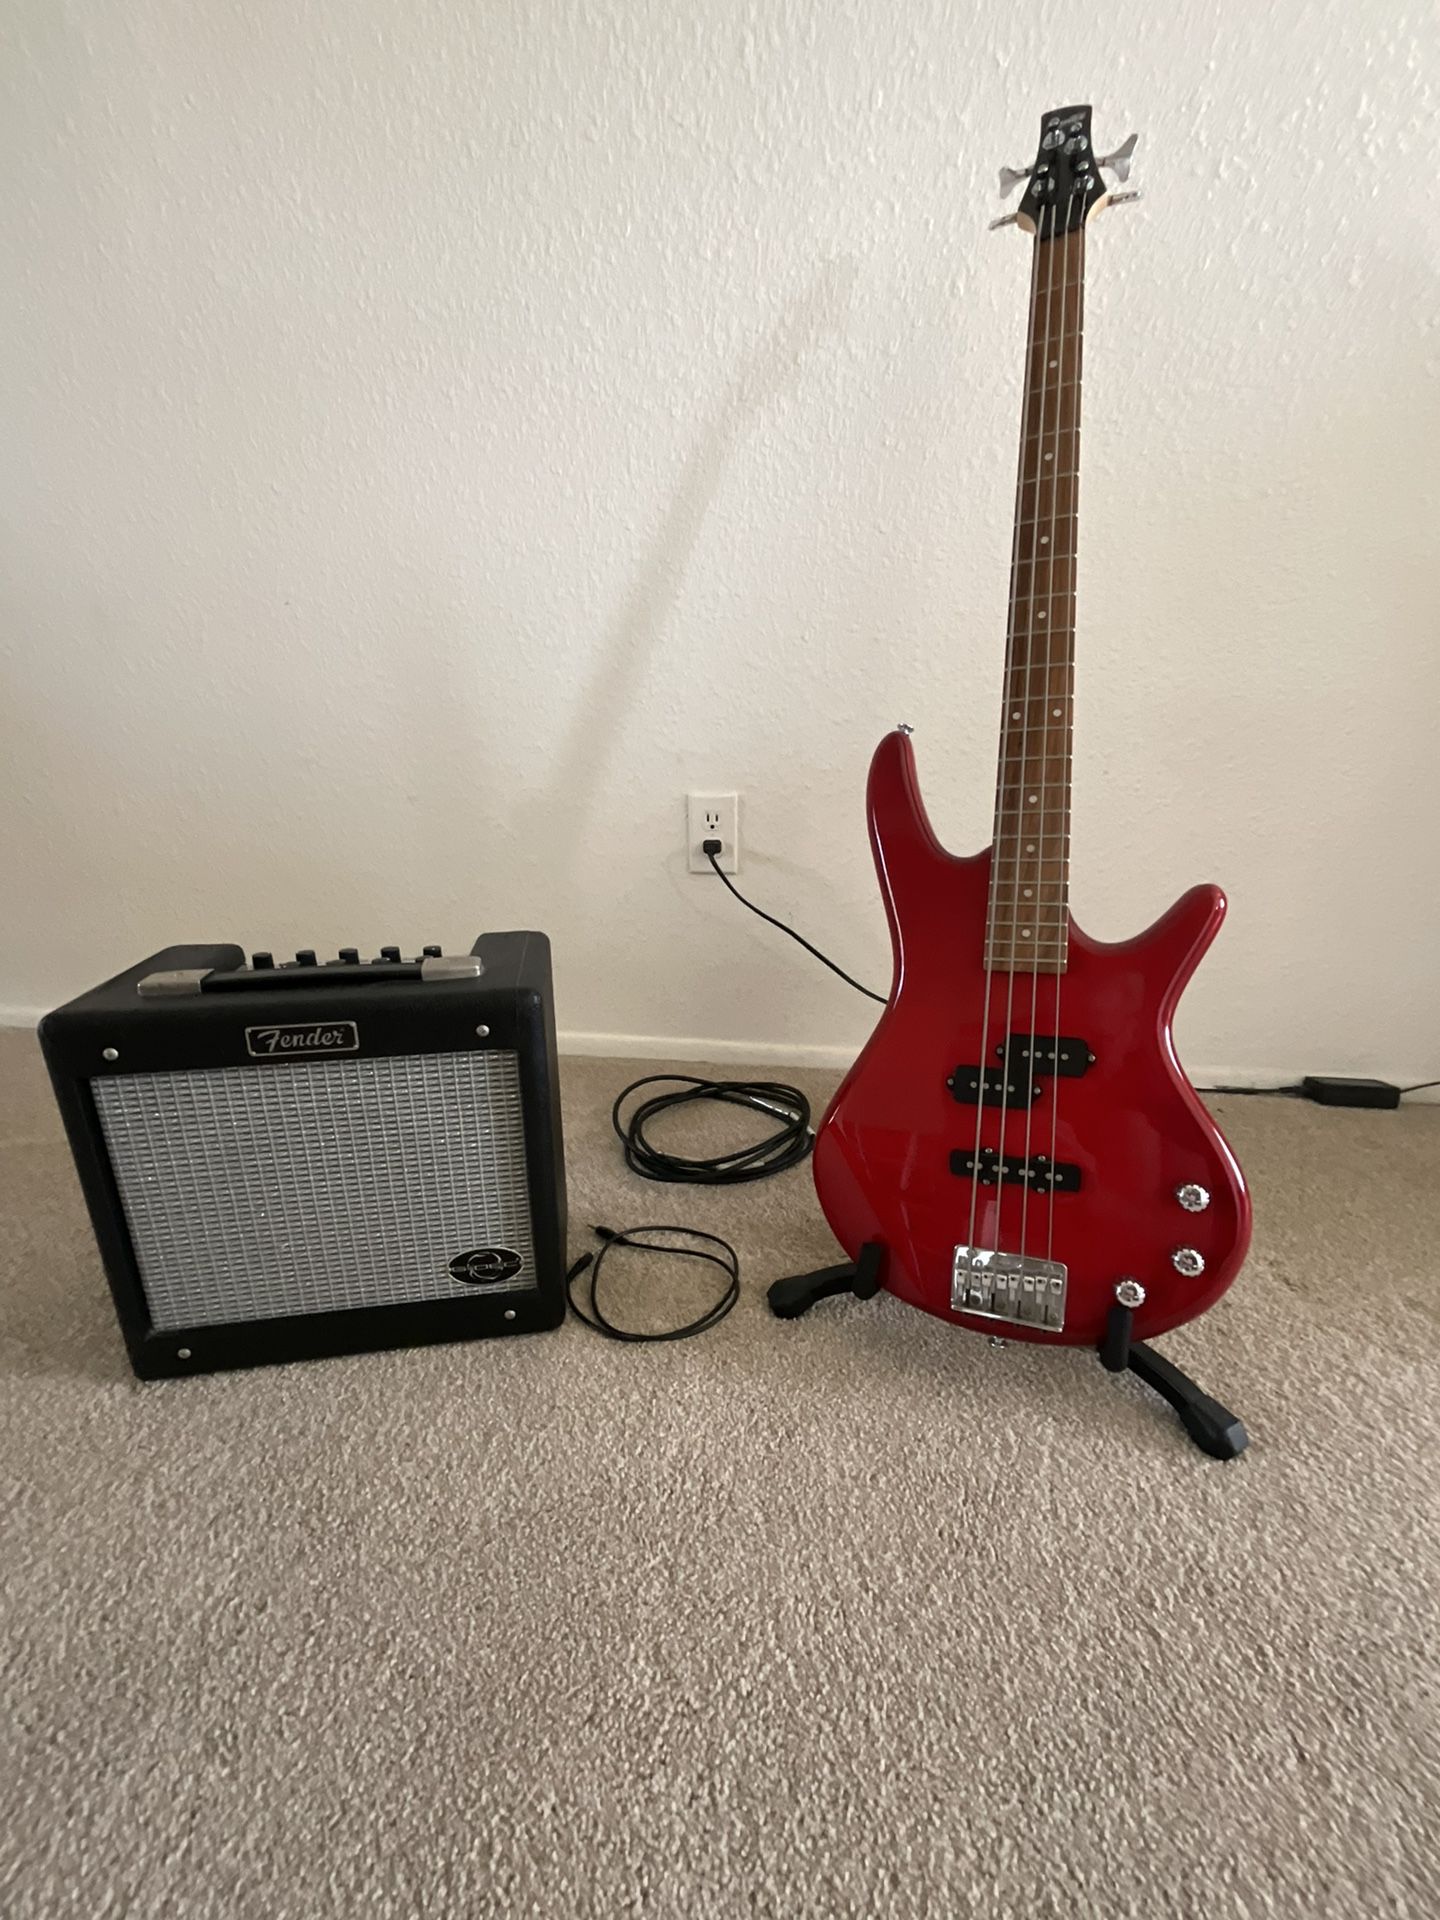 Ibanez Gio Electric Bass Guitar and Fender G-DEC Junior amp